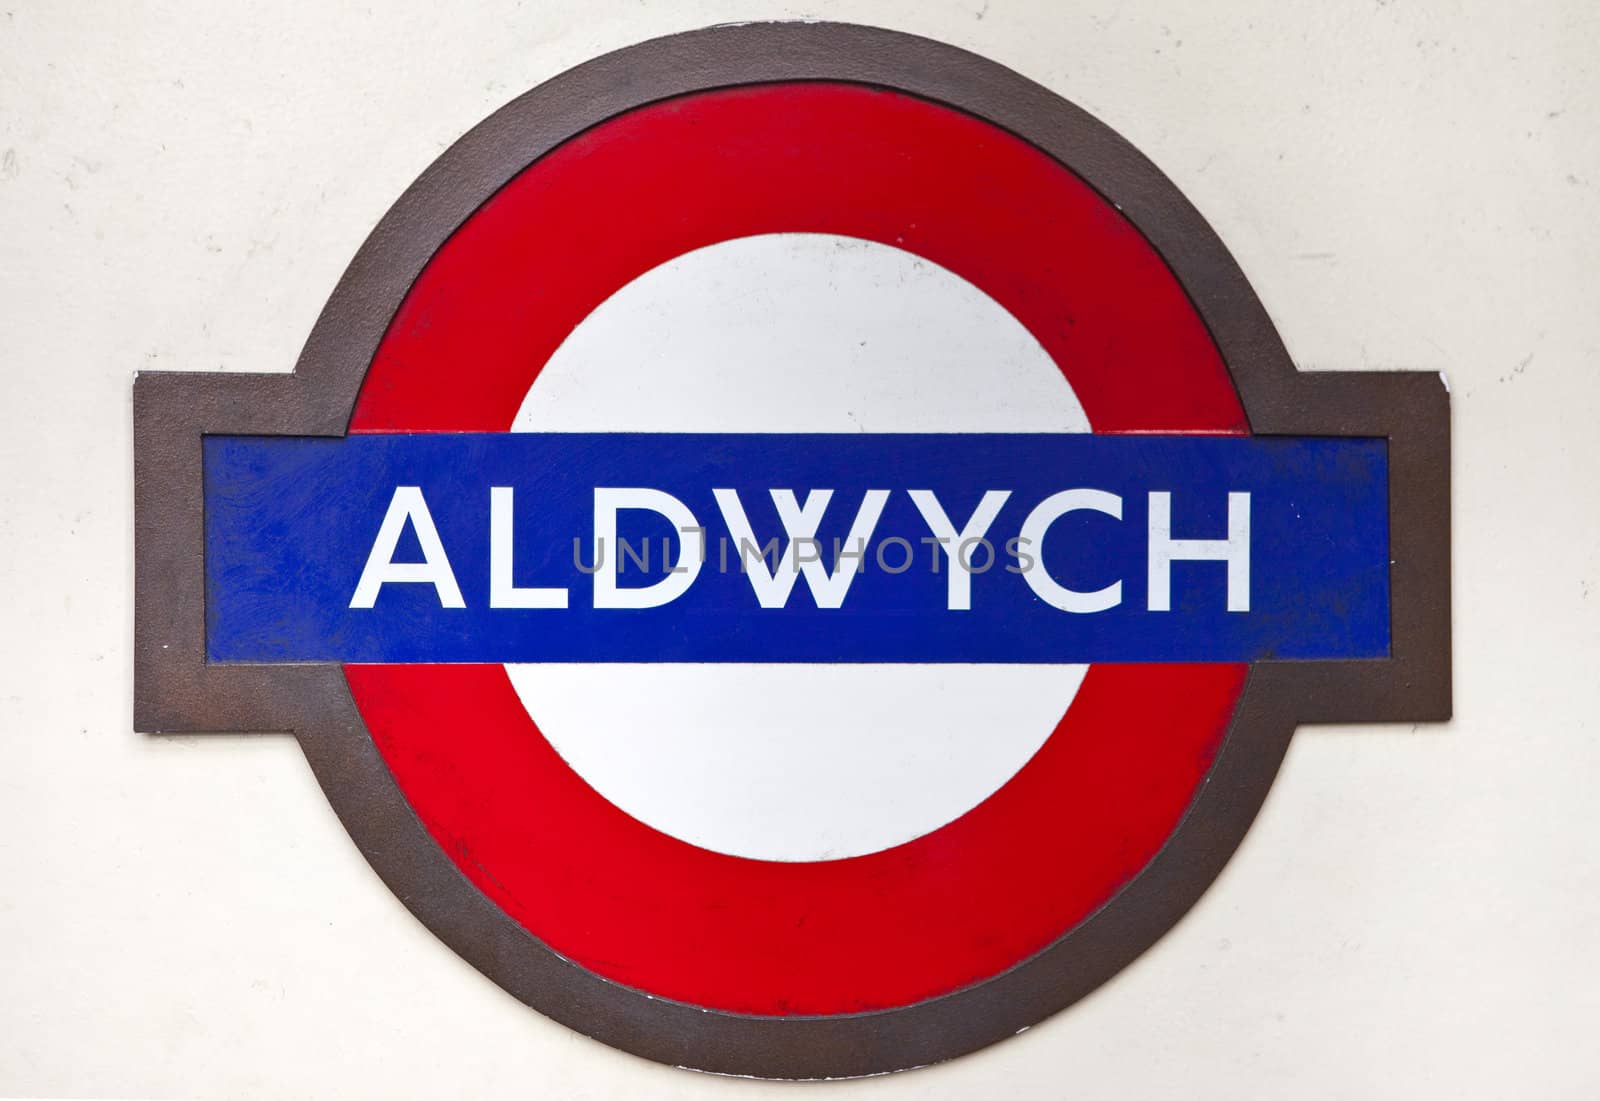 London Underground sign for the now un-used Aldwych station.